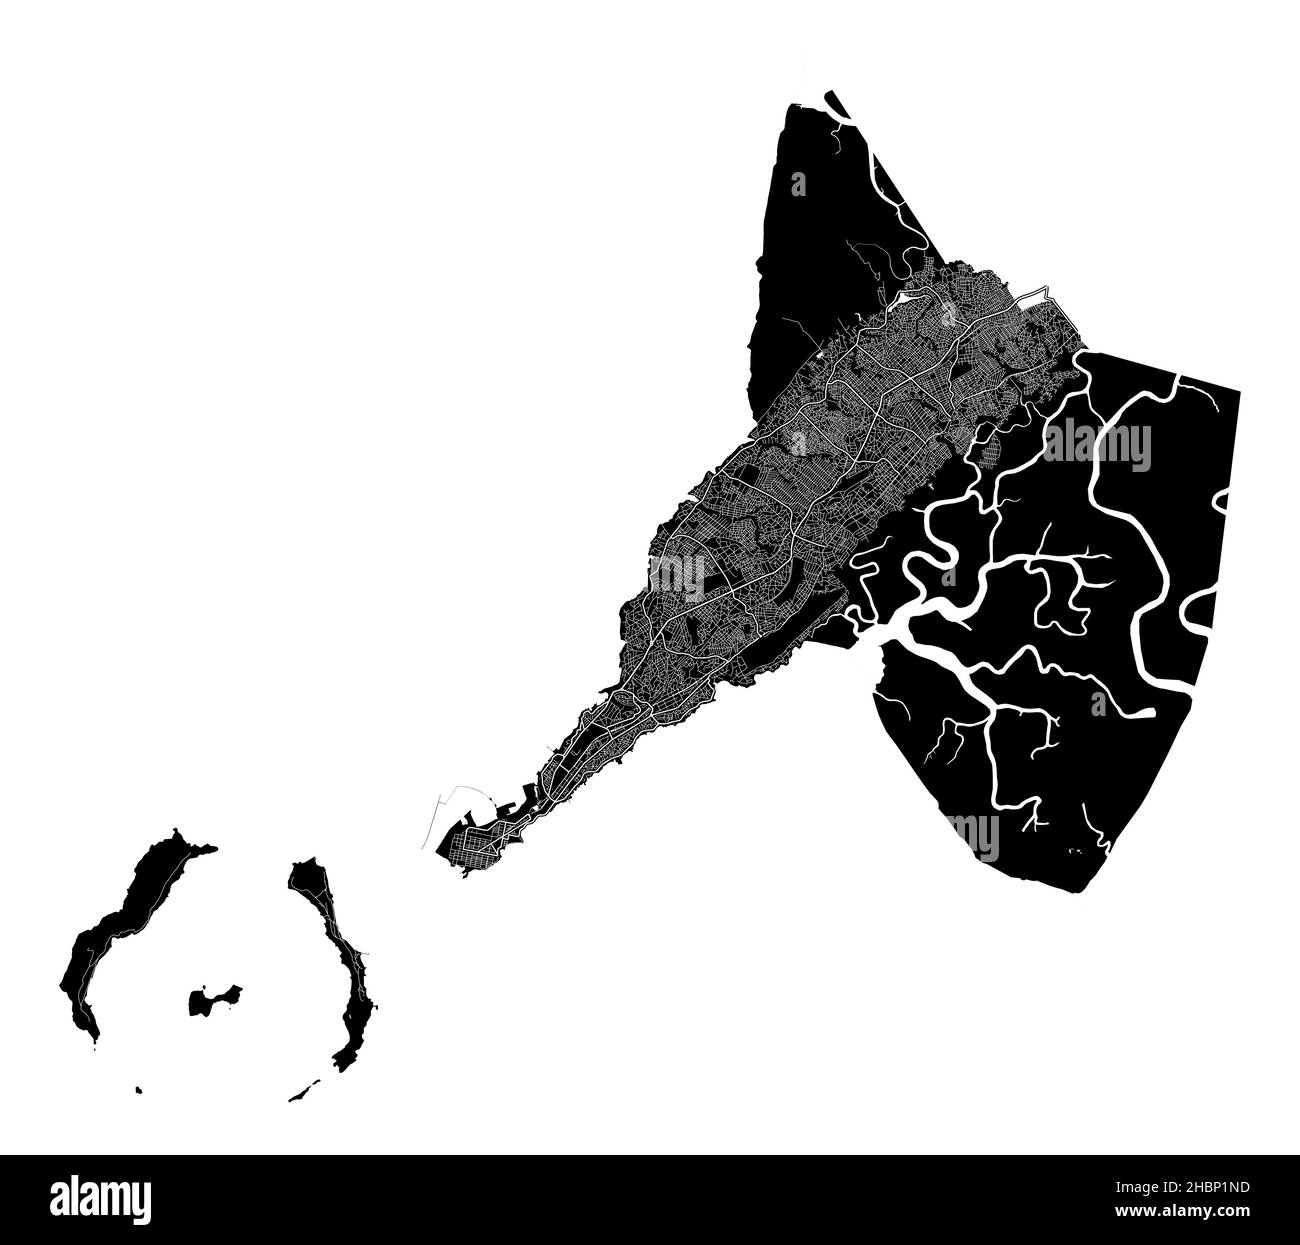 Conakry, Guinea, high resolution vector map with city boundaries, and editable paths. The city map was drawn with white areas and lines for main roads Stock Vector